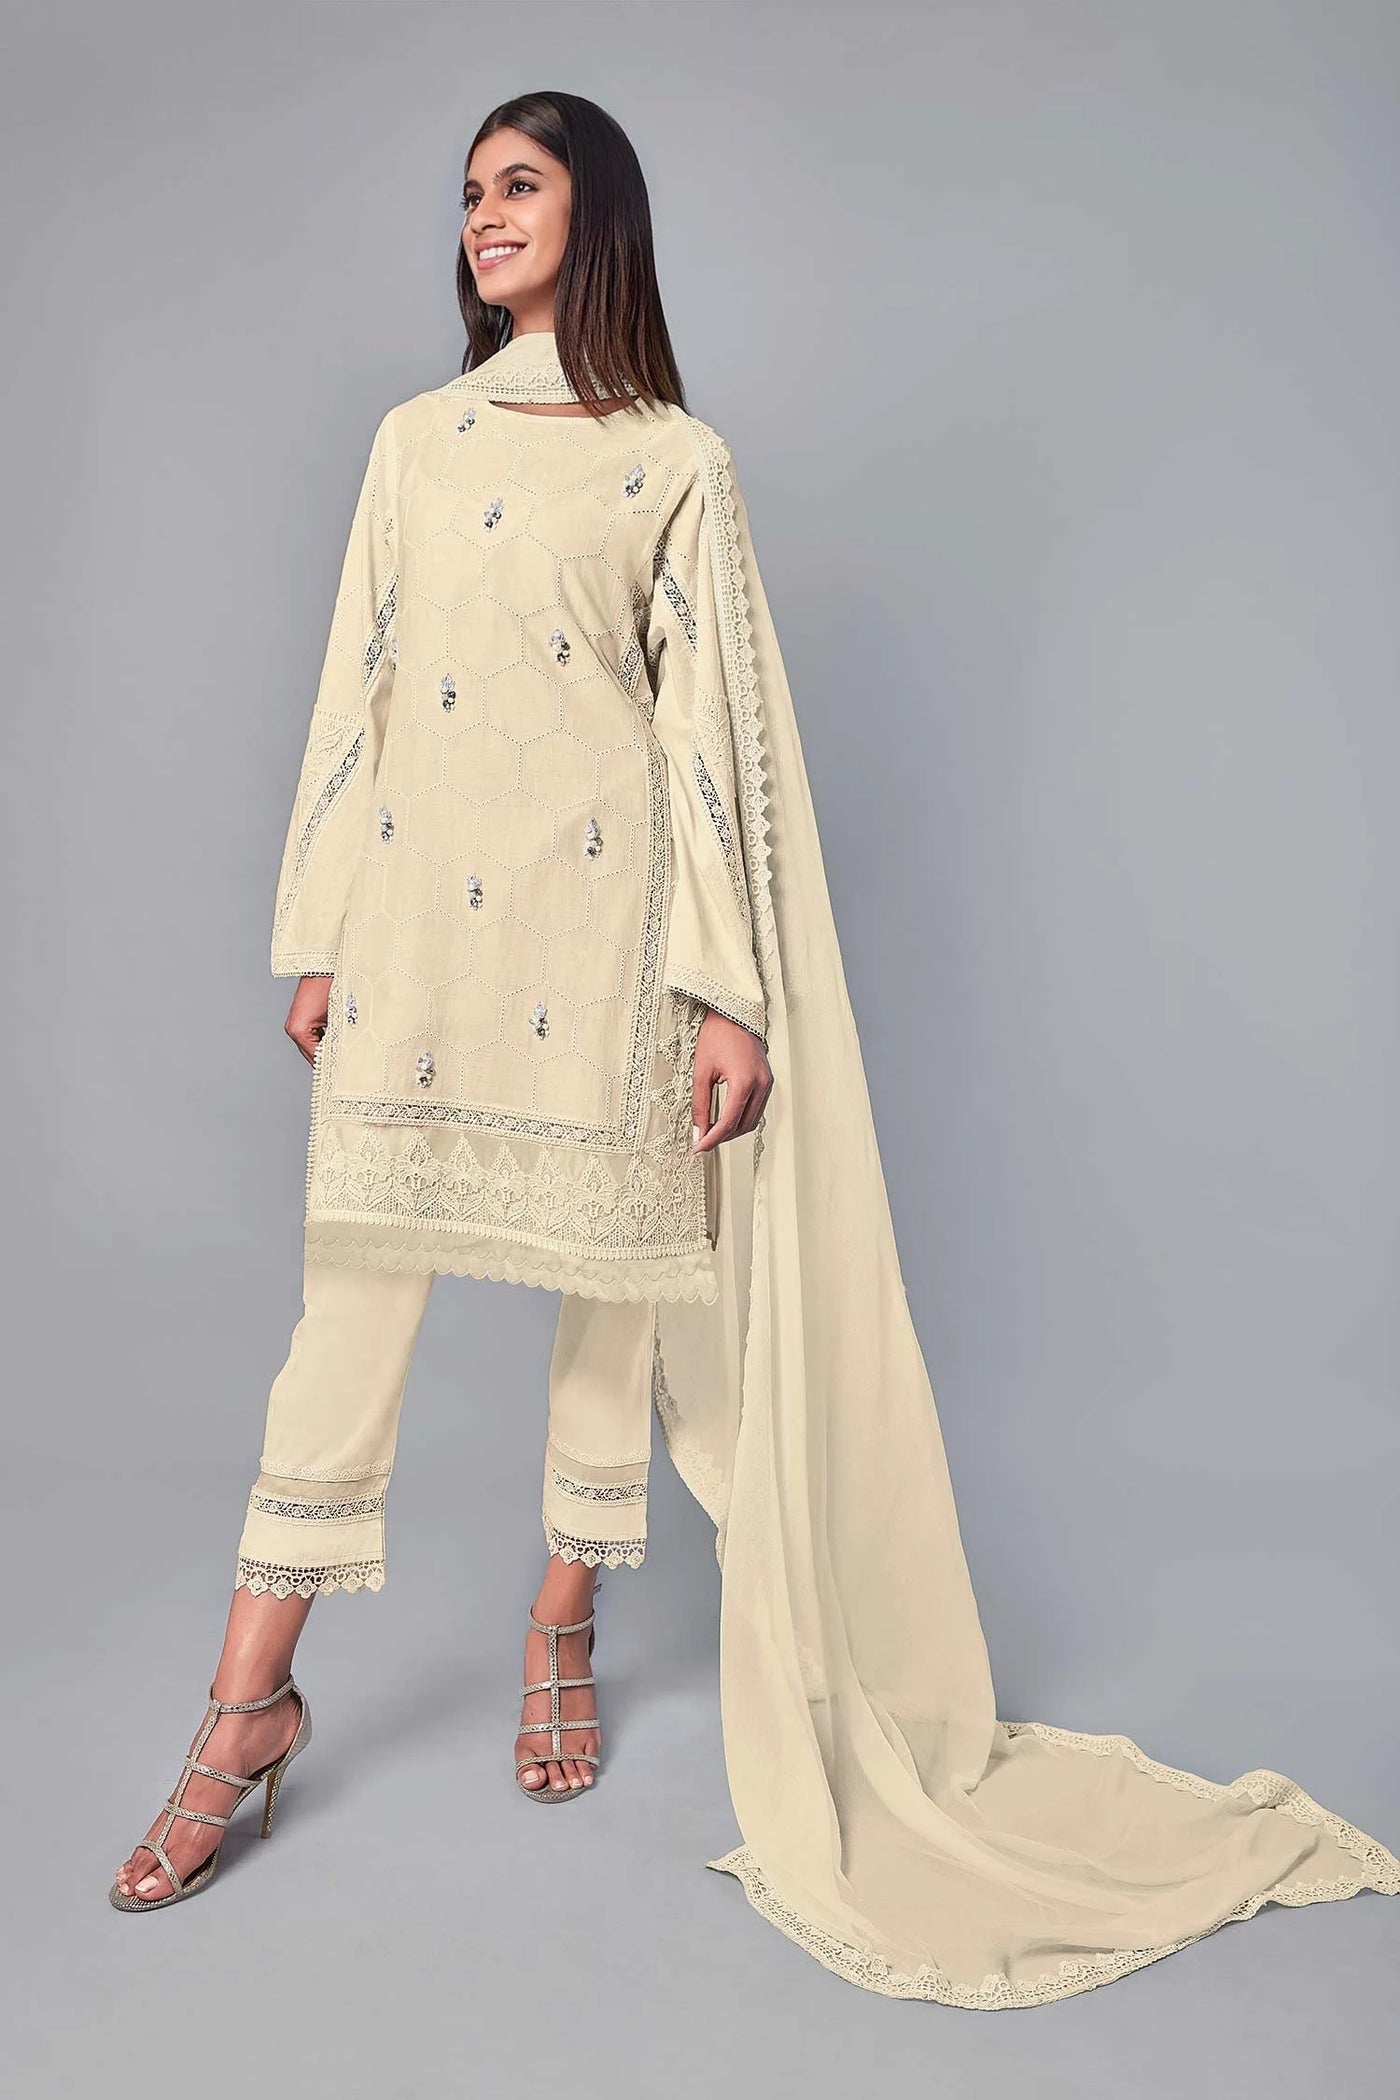 Oyster Cotton Kurta Set Indian Clothing in Denver, CO, Aurora, CO, Boulder, CO, Fort Collins, CO, Colorado Springs, CO, Parker, CO, Highlands Ranch, CO, Cherry Creek, CO, Centennial, CO, and Longmont, CO. NATIONWIDE SHIPPING USA- India Fashion X